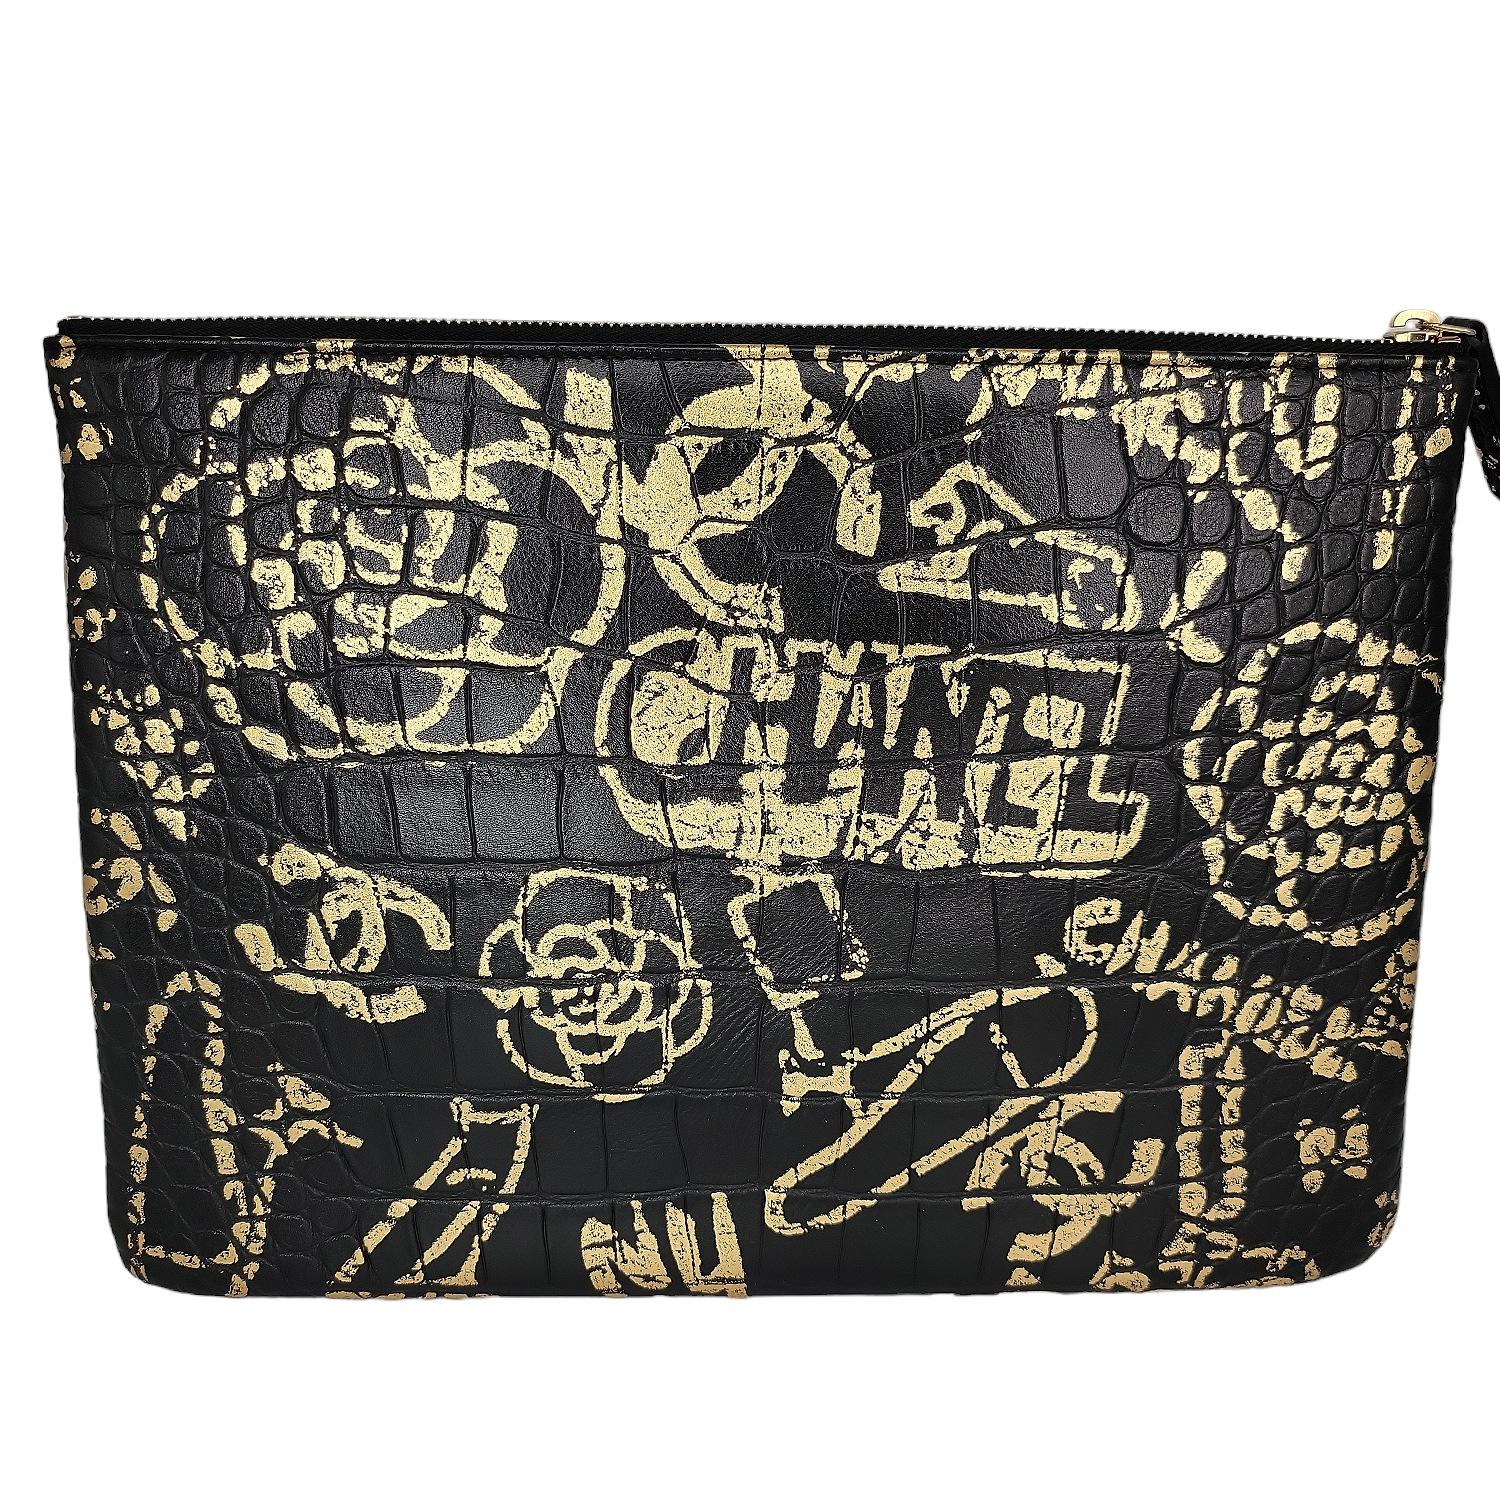 From the Pre-Fall 2019 Metiers d'Art Collection; Chanel Black And Gold Croc-Embossed 2.55 Reissue. This stylish bag is crafted of luxurious croc-embossed leather in black, with stylish gold graffiti and gold hardware. The bag features a top zipper